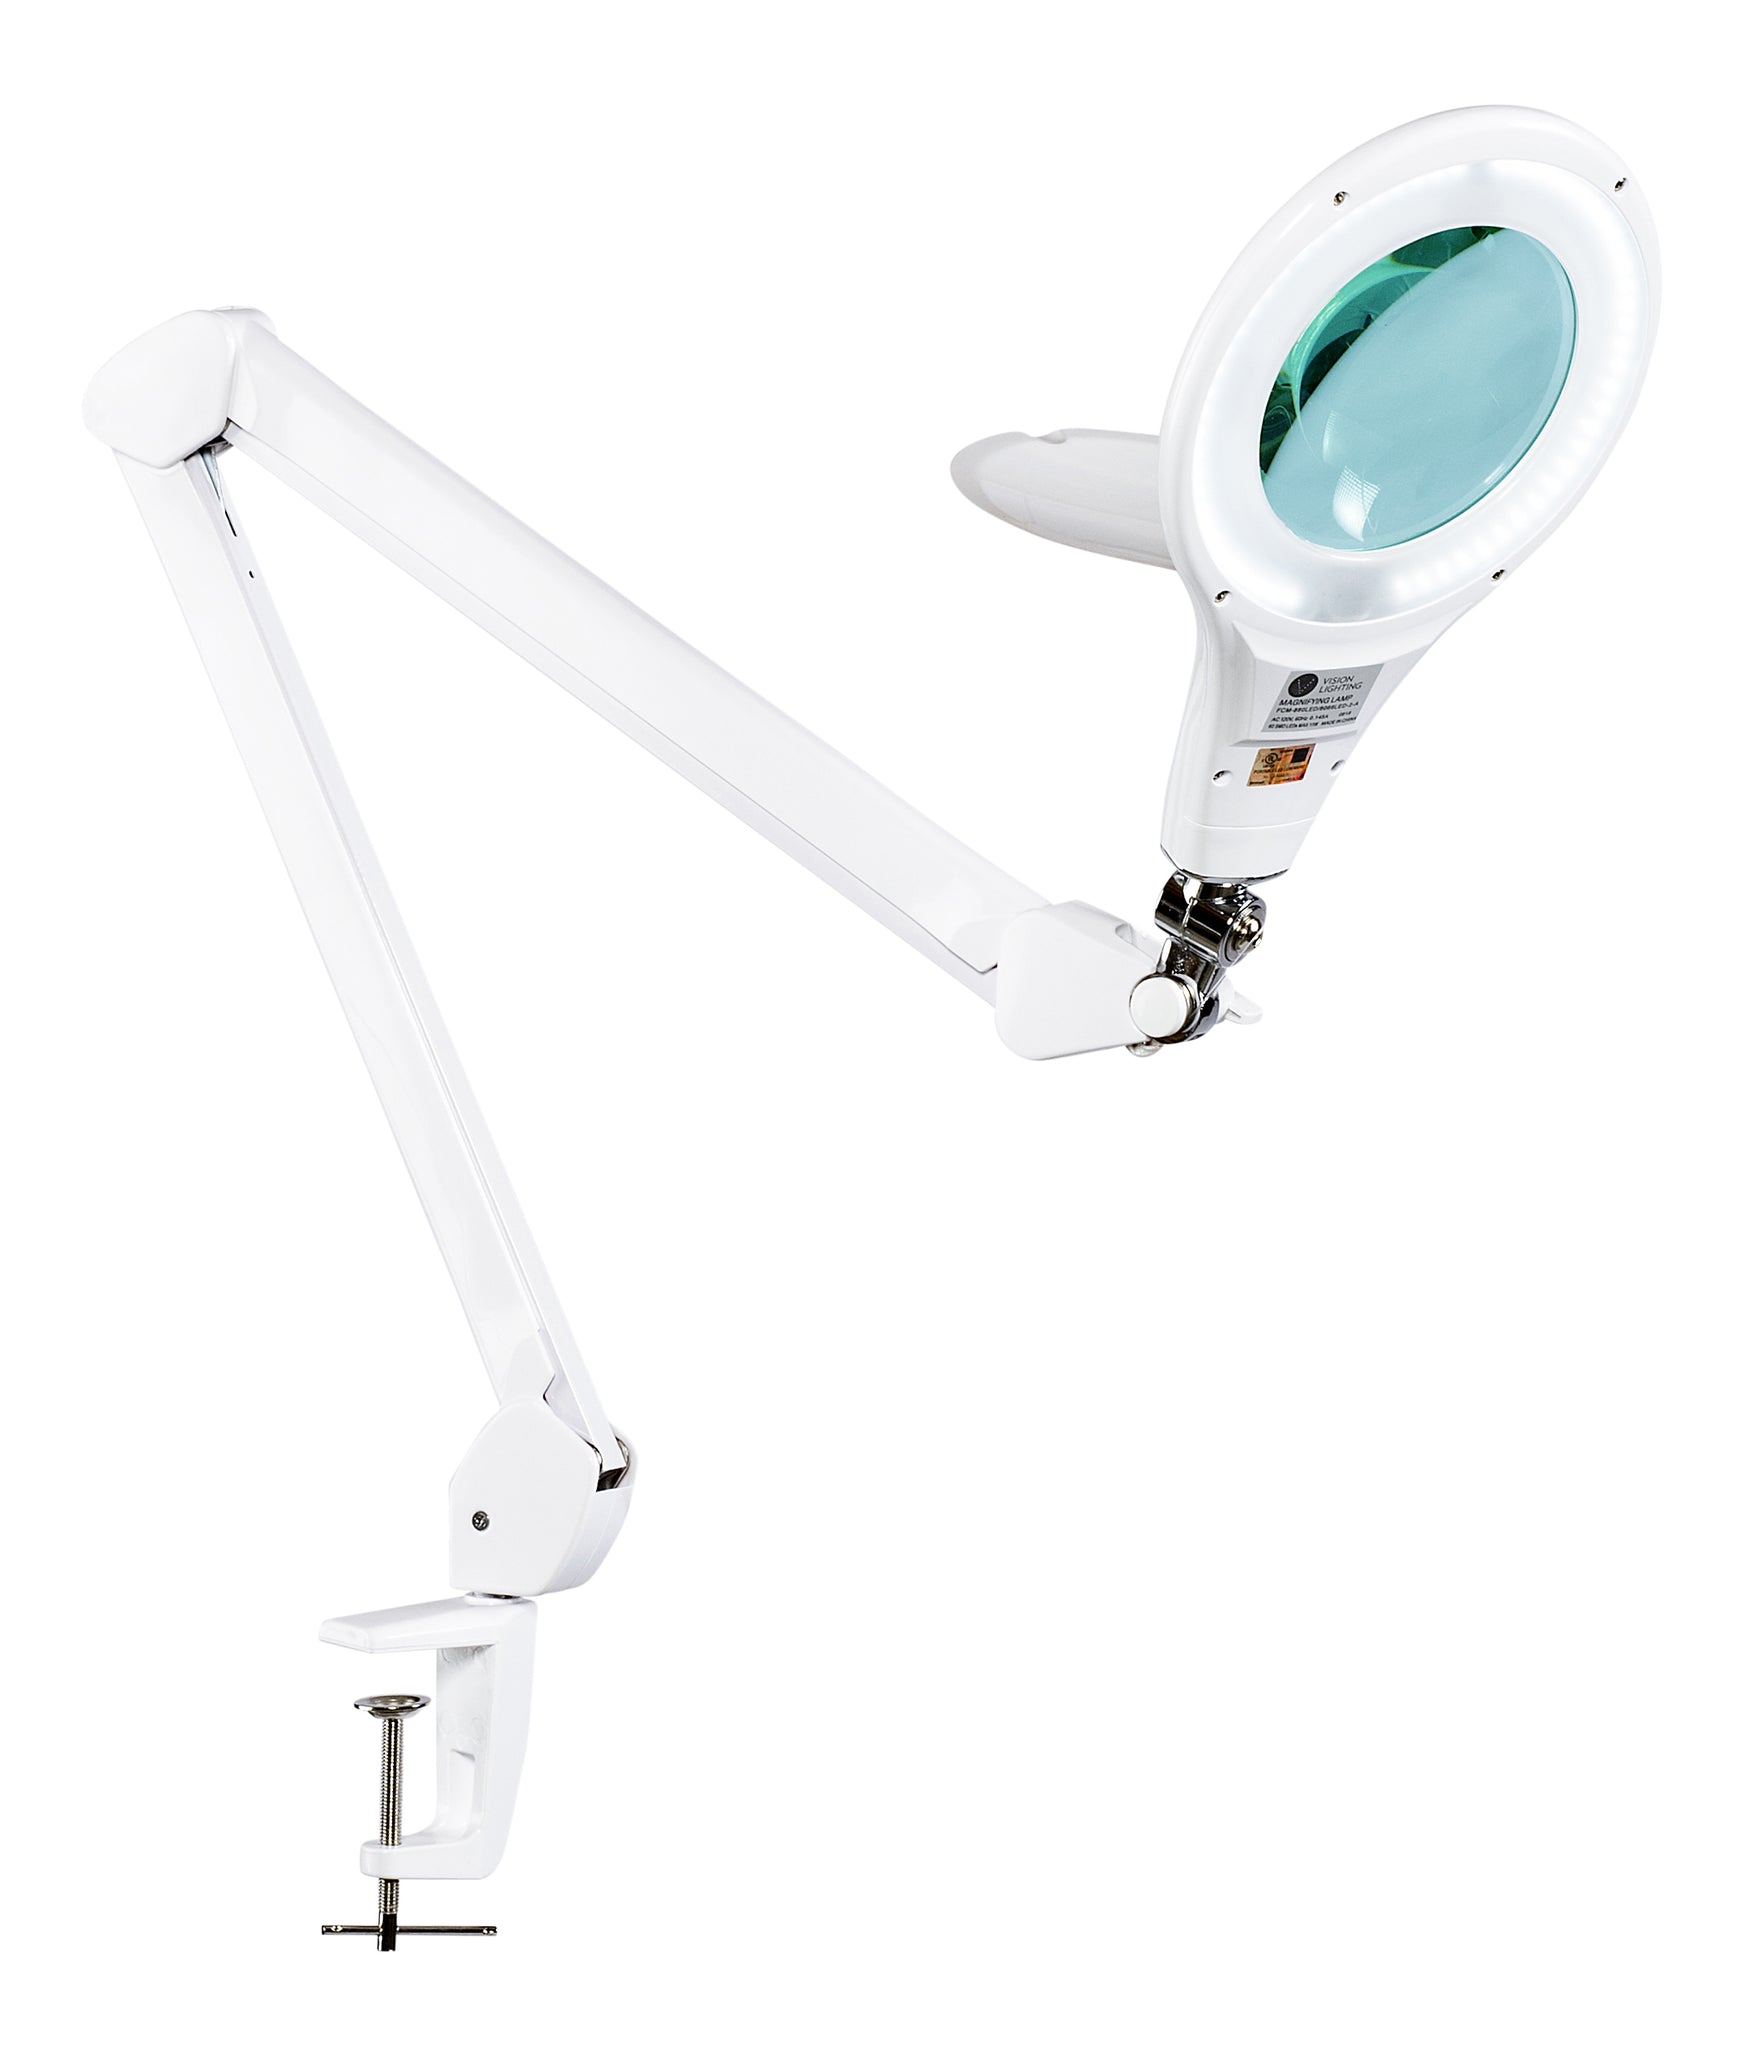 Vision Lighting LED Magnifying Lamp with Clamp - Ultra Bright Task Magnifier 5